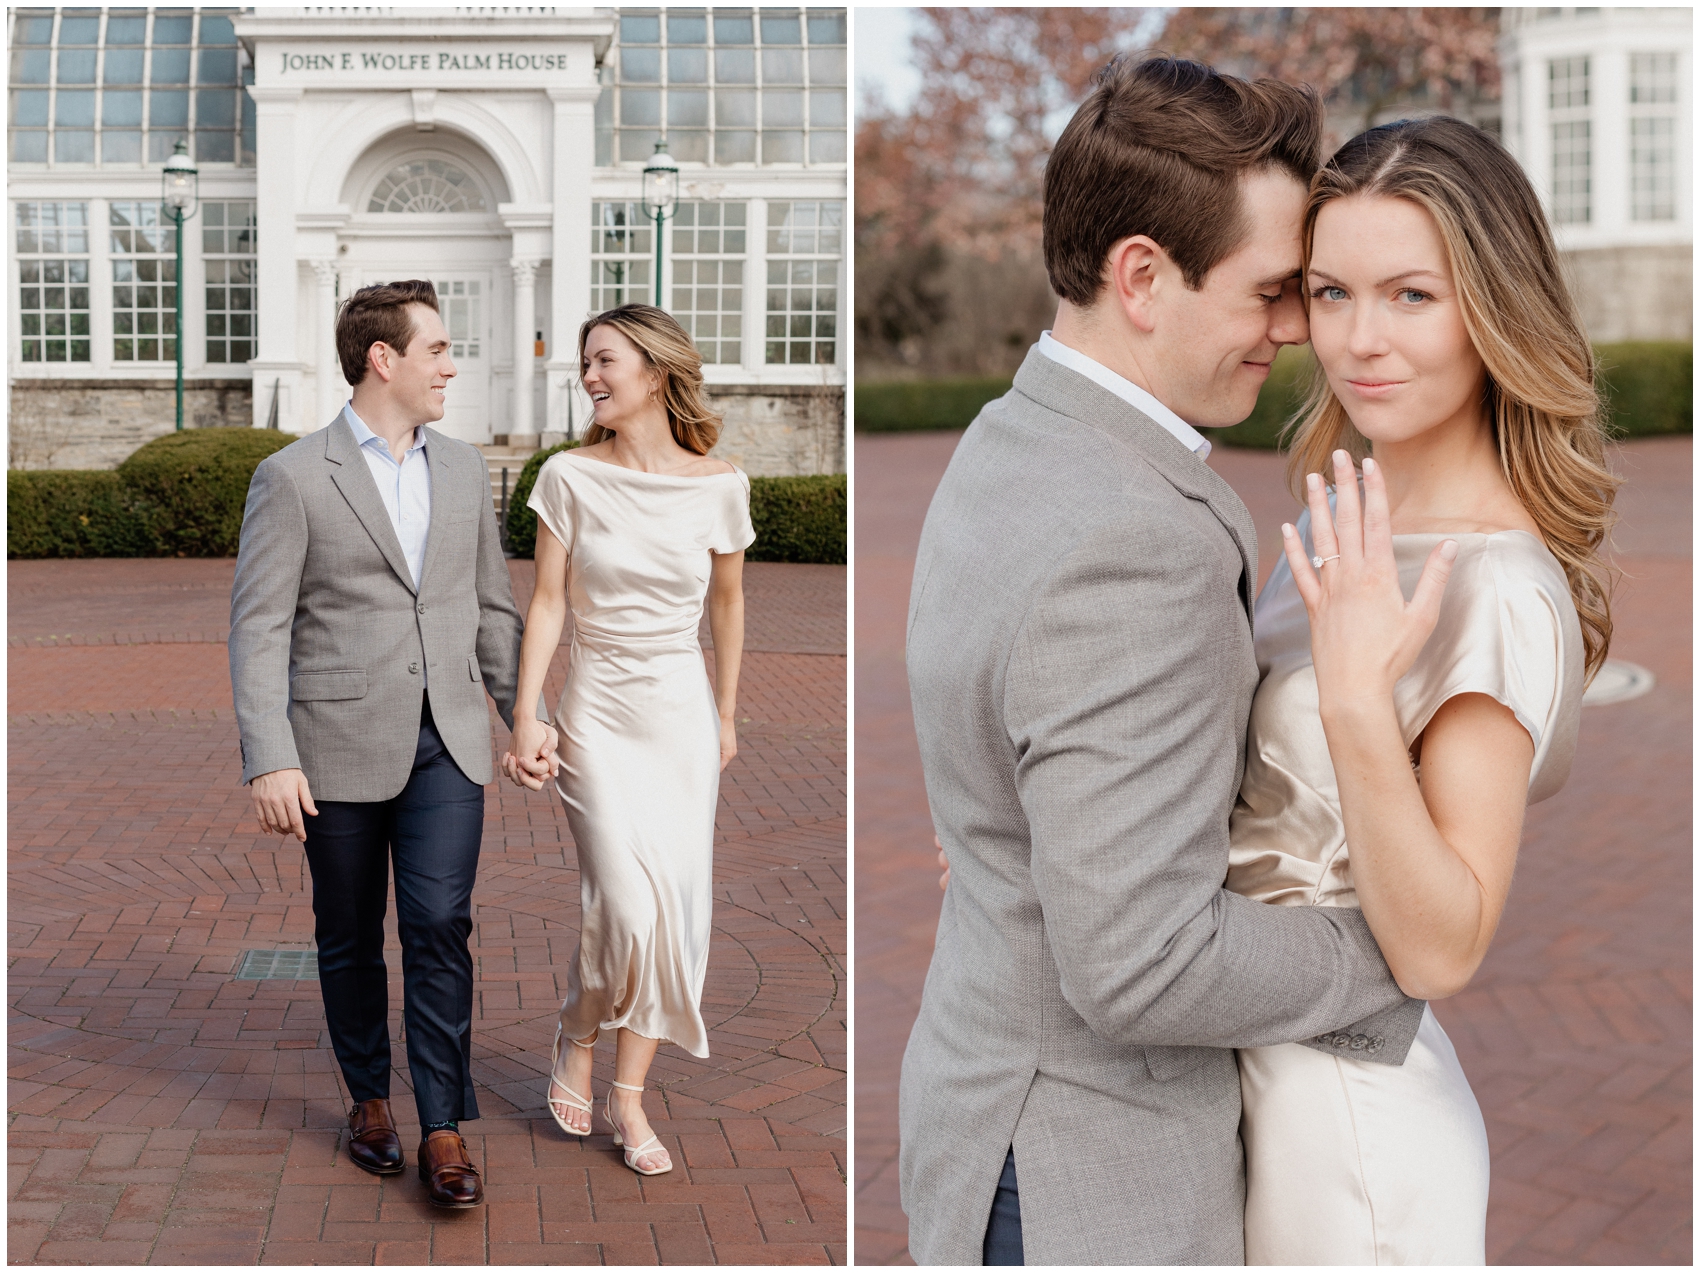 Adam Lowe photography, Columbus, Ohio, wedding, editorial, fashion, commercial, Franklin park conservatory, surprise proposal, engaged, engagement, wedding, love, couple